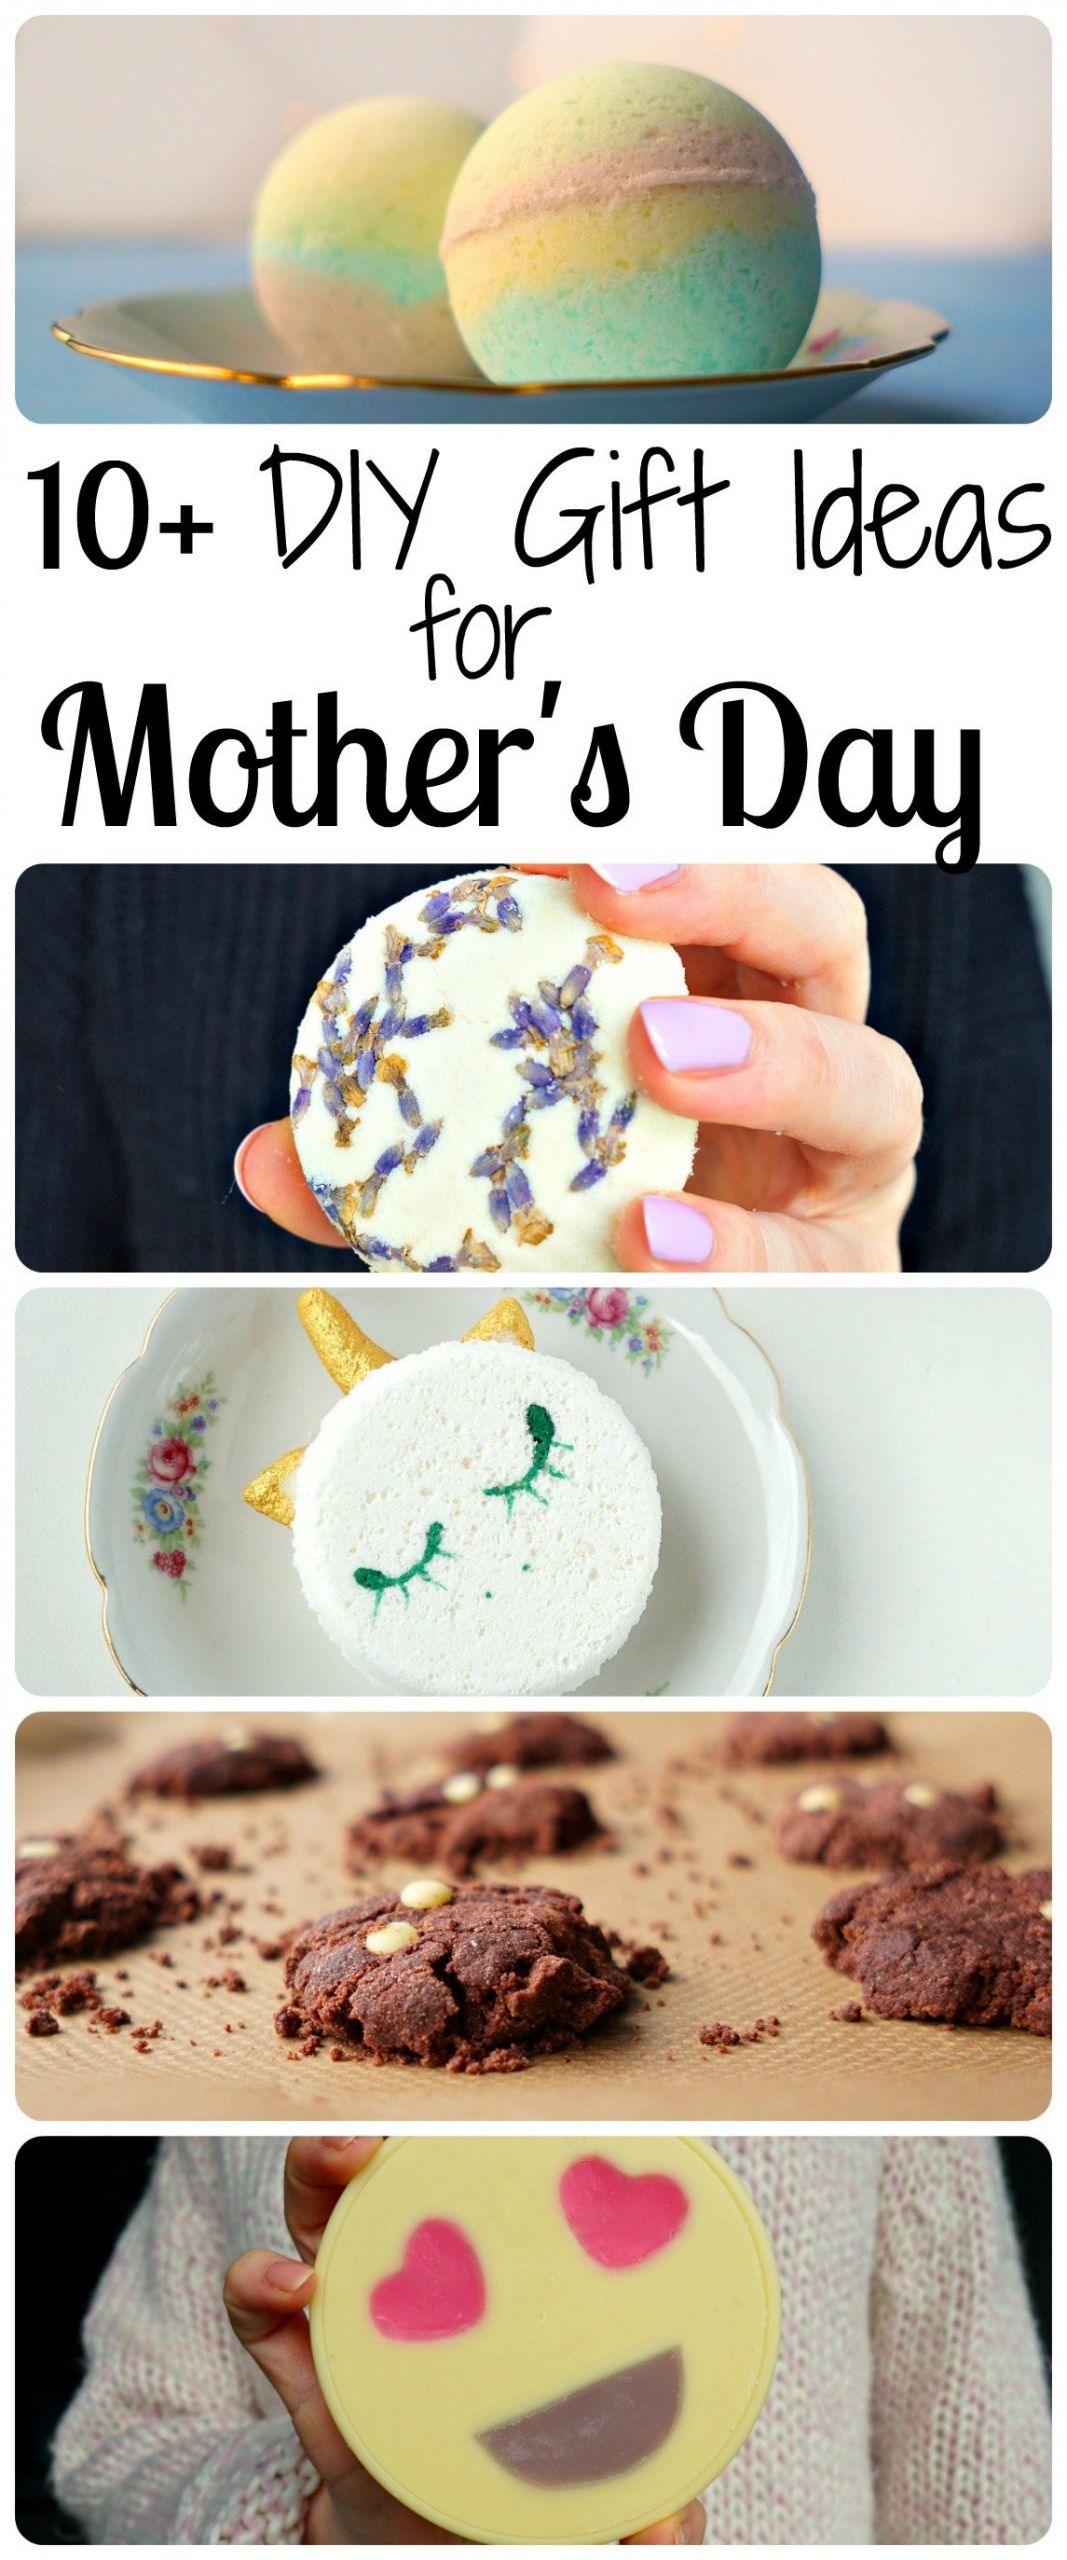 Mother'S Day Gift Ideas Homemade
 30 Gift Ideas for Mother s Day to Buy or DIY The Makeup